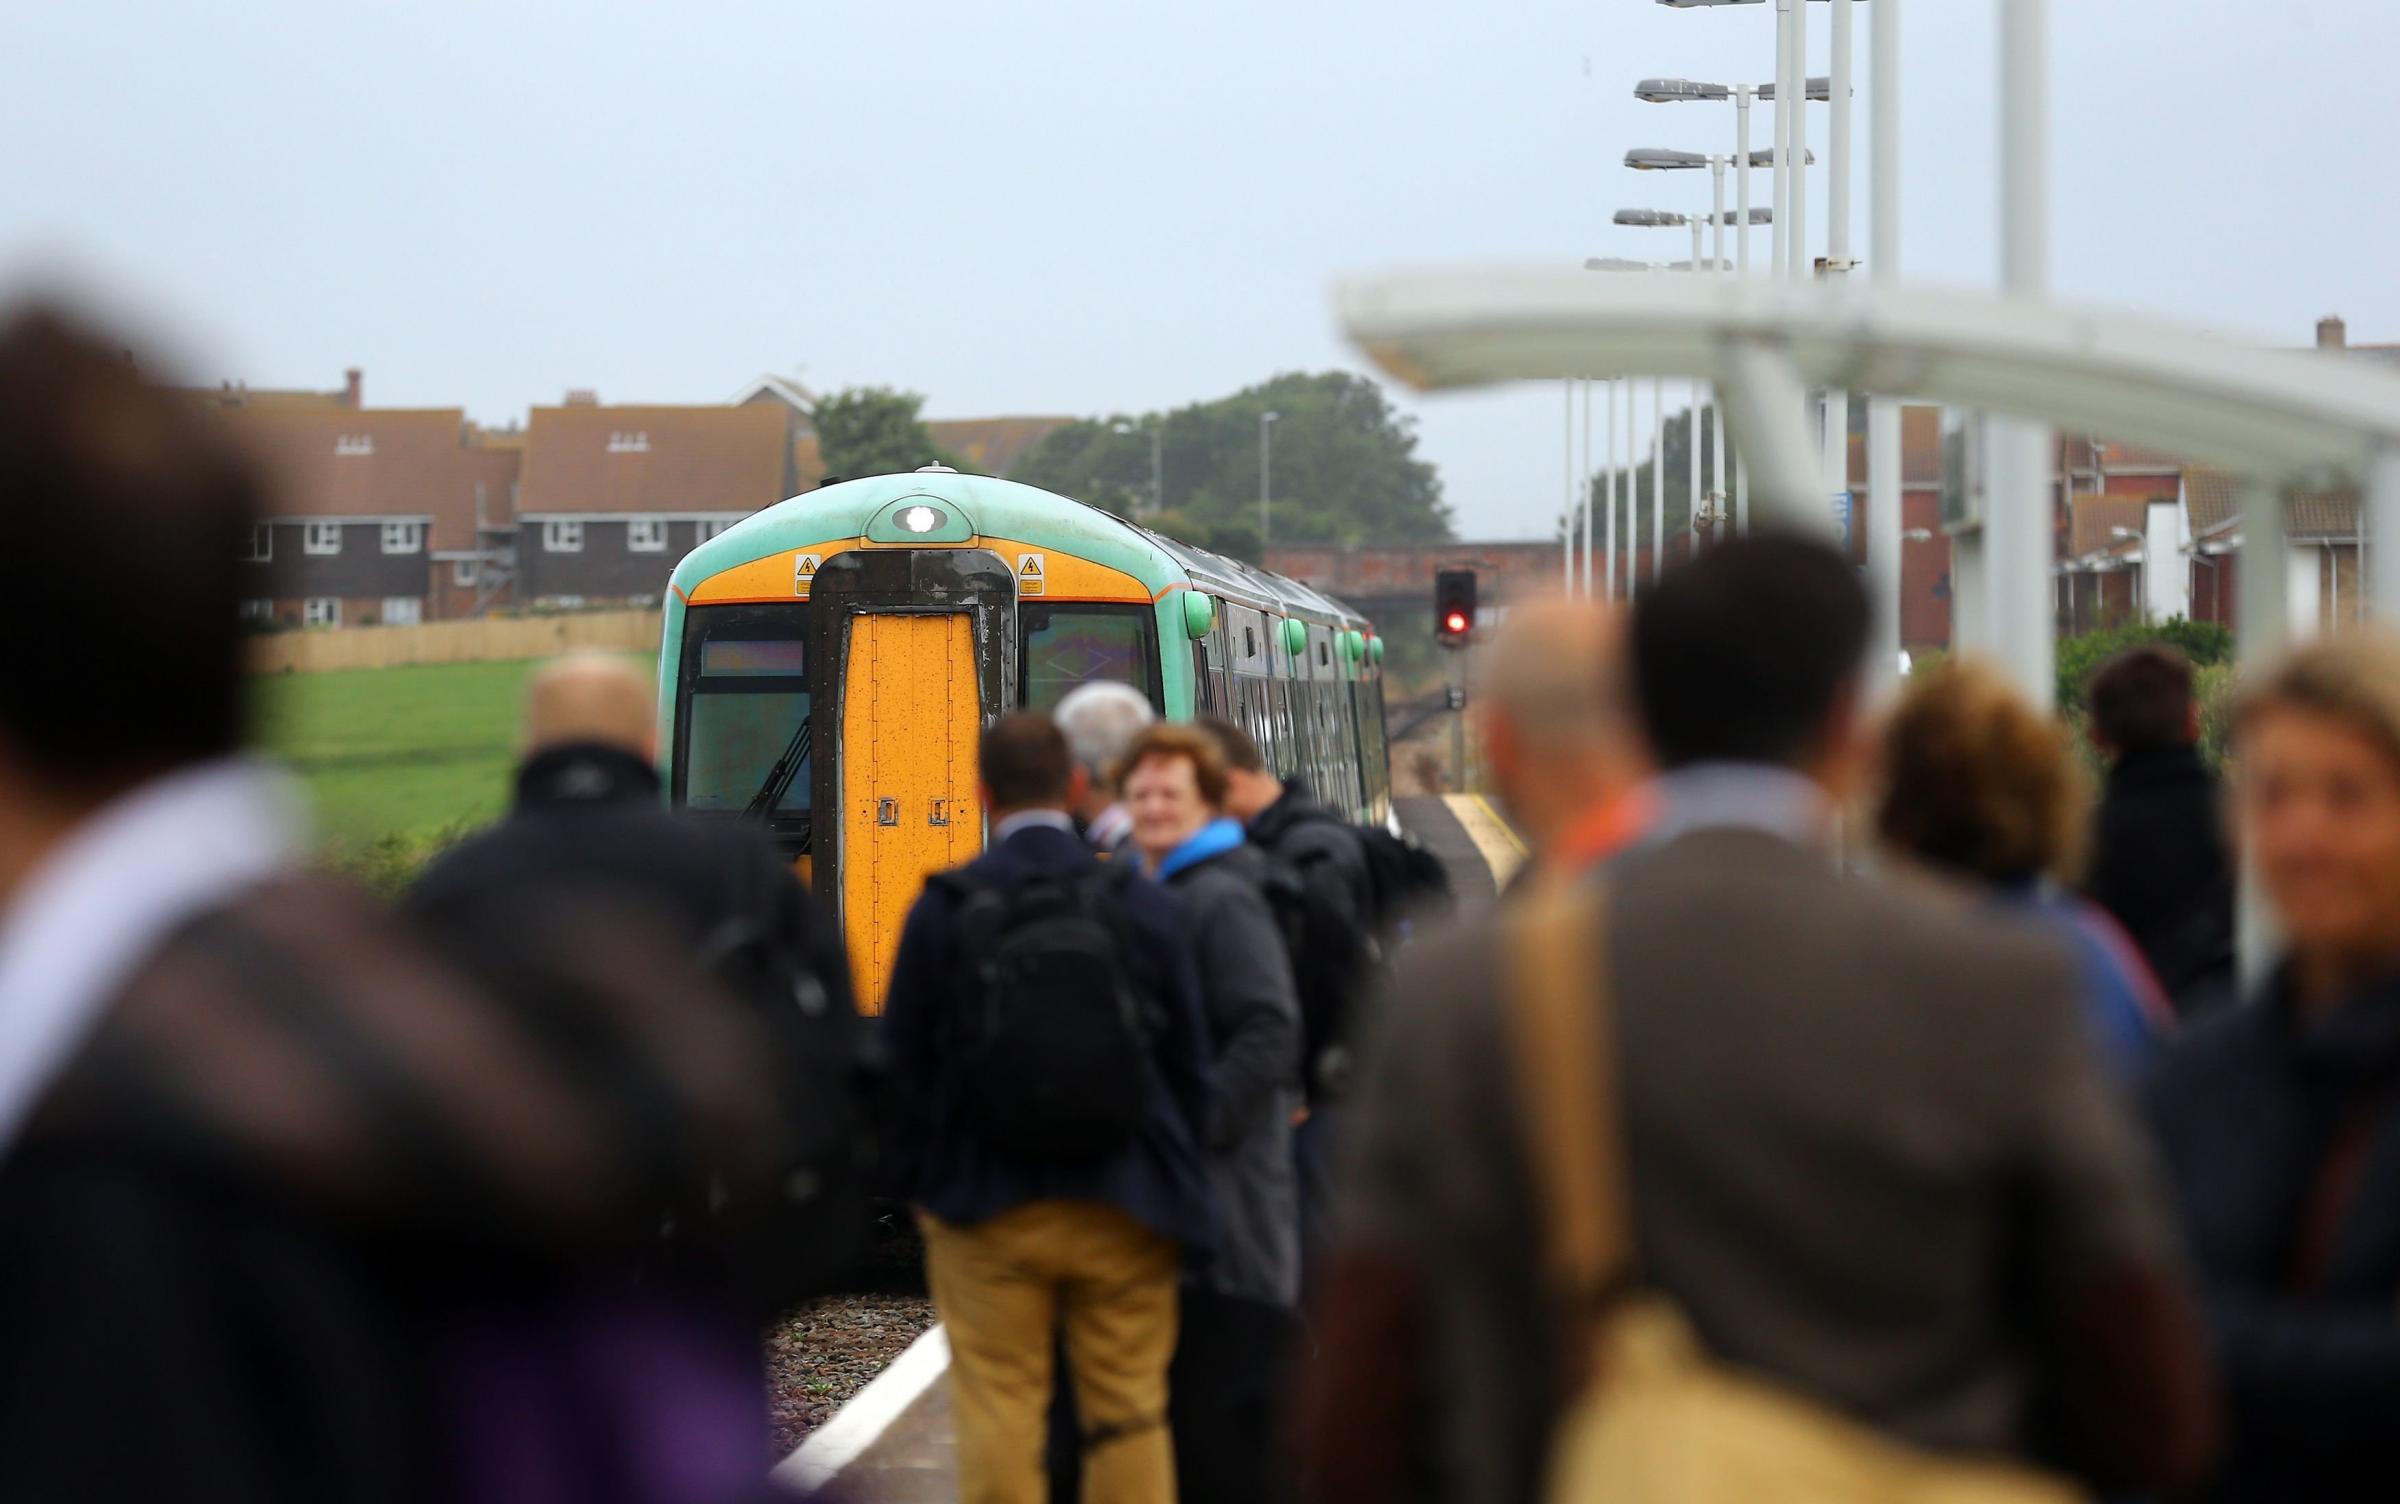 £15m compensation for commuters - but Southern won't pay a penny